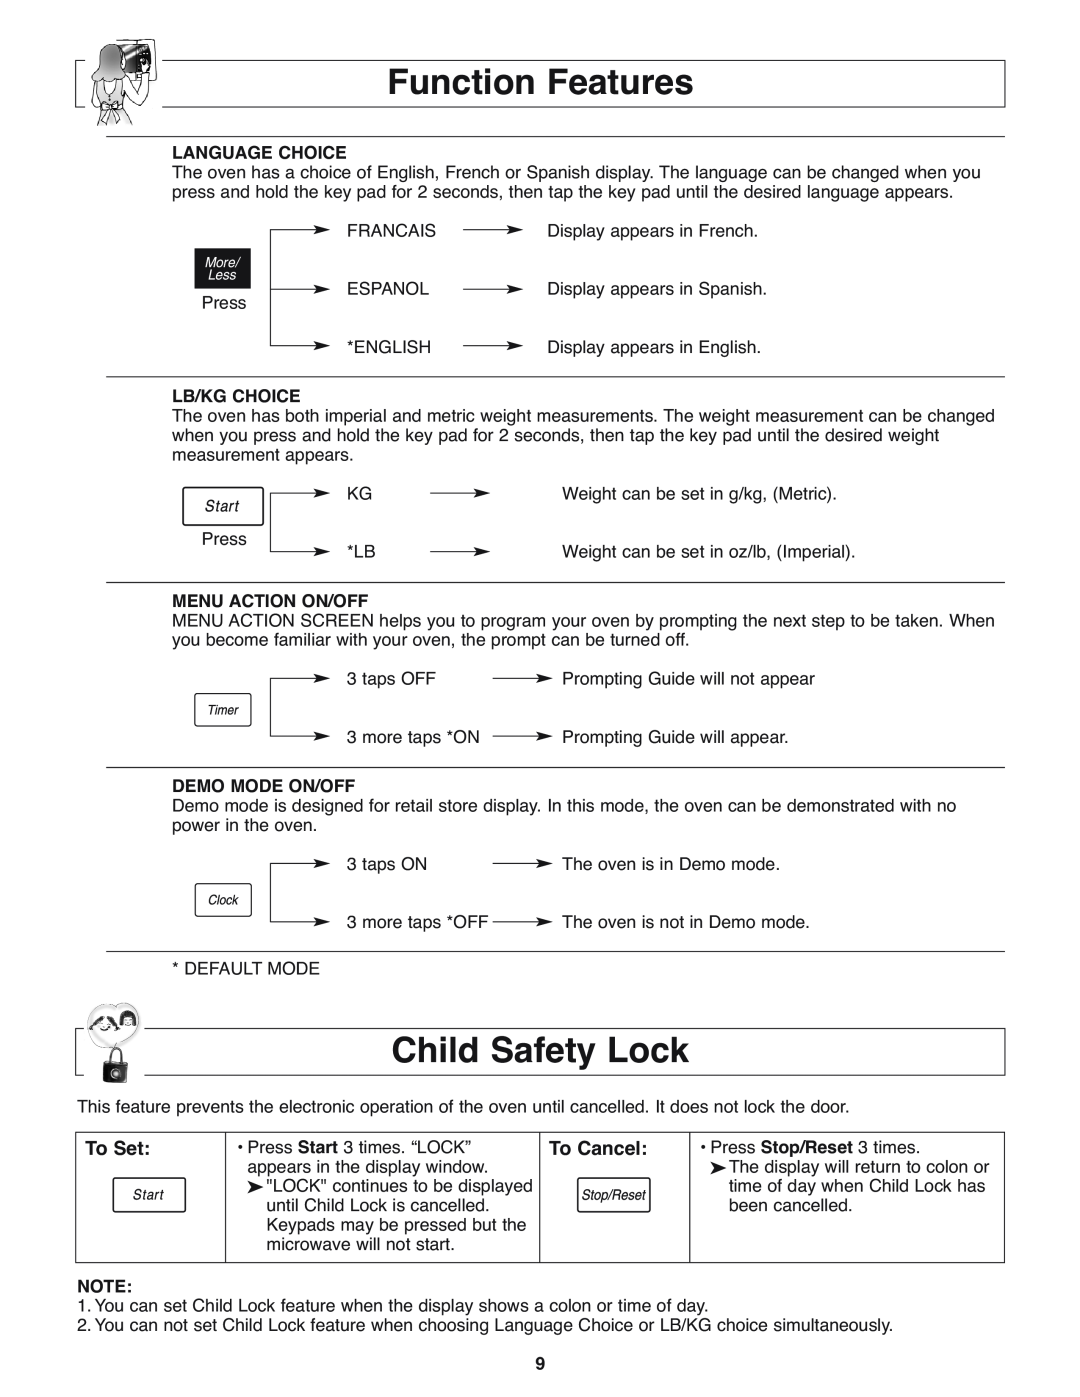 Panasonic NN-H275 operating instructions Function Features, Child Safety Lock, To Set, To Cancel 